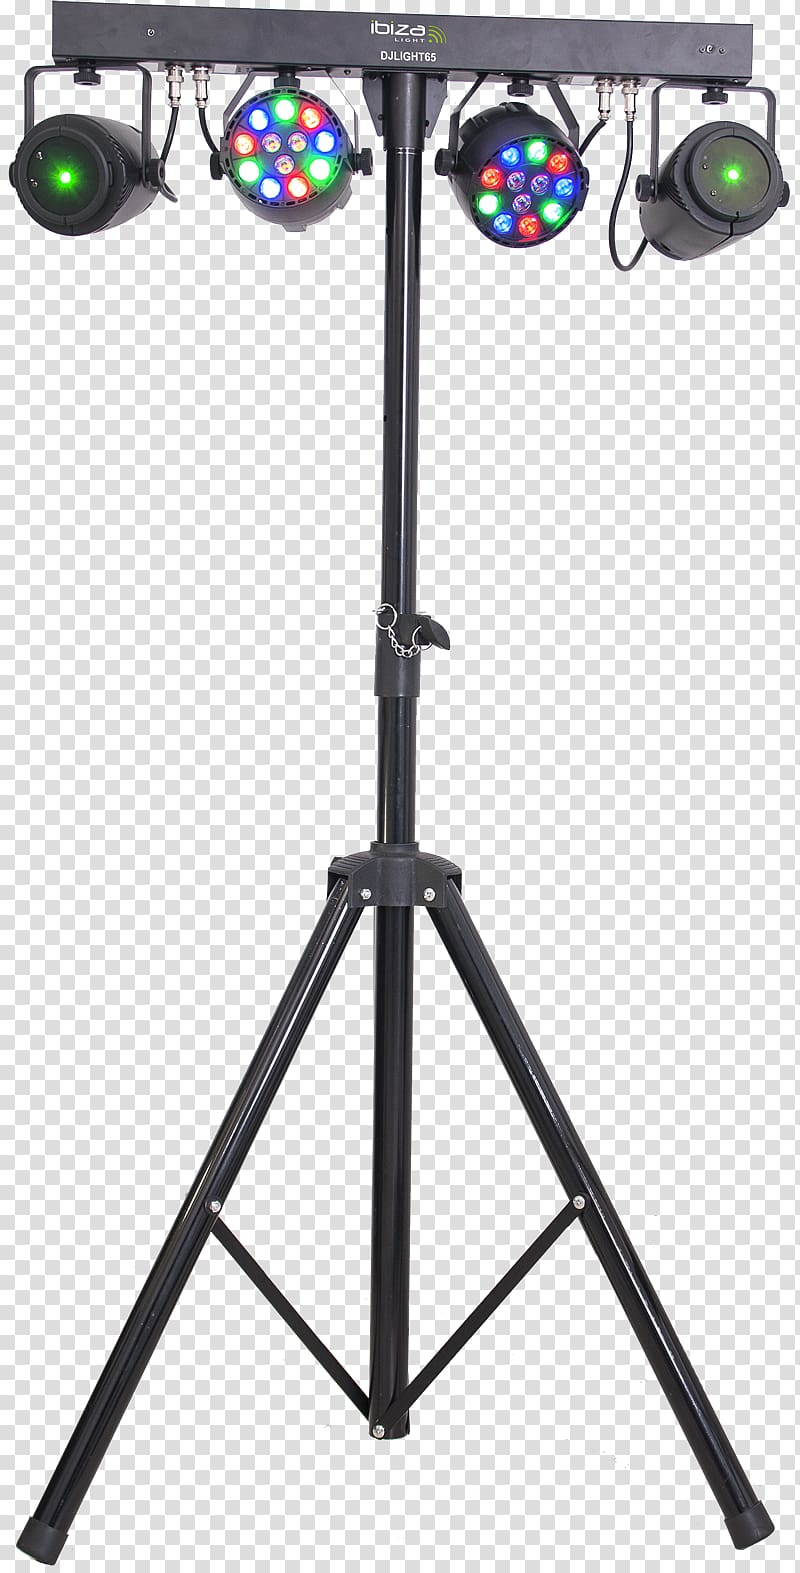 Parabolic aluminized reflector light DMX512 Stage lighting, light stand transparent background PNG clipart